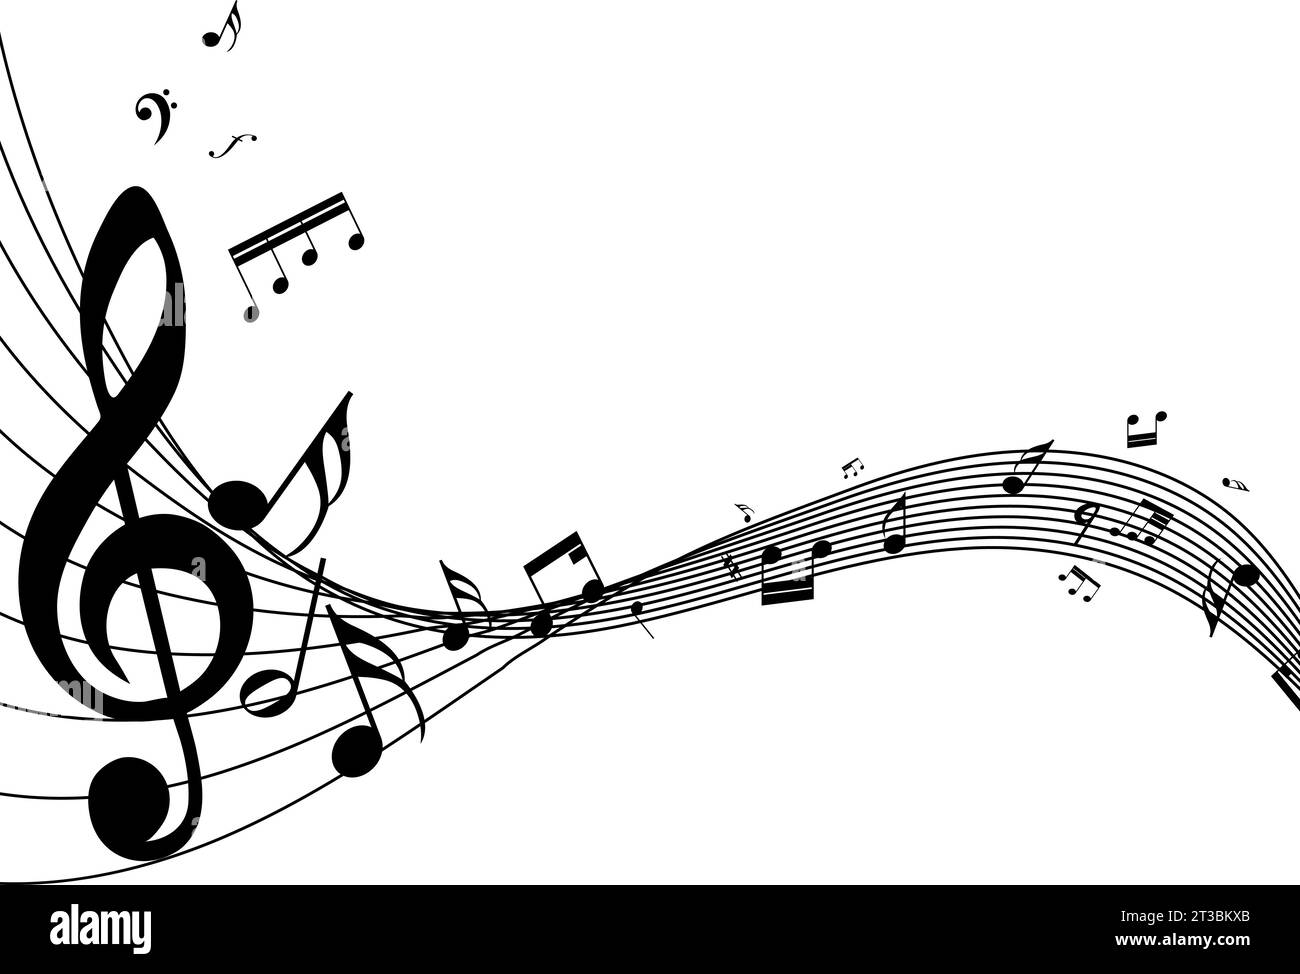 Musical notes staff background on white. Vector illustration. Stock Vector